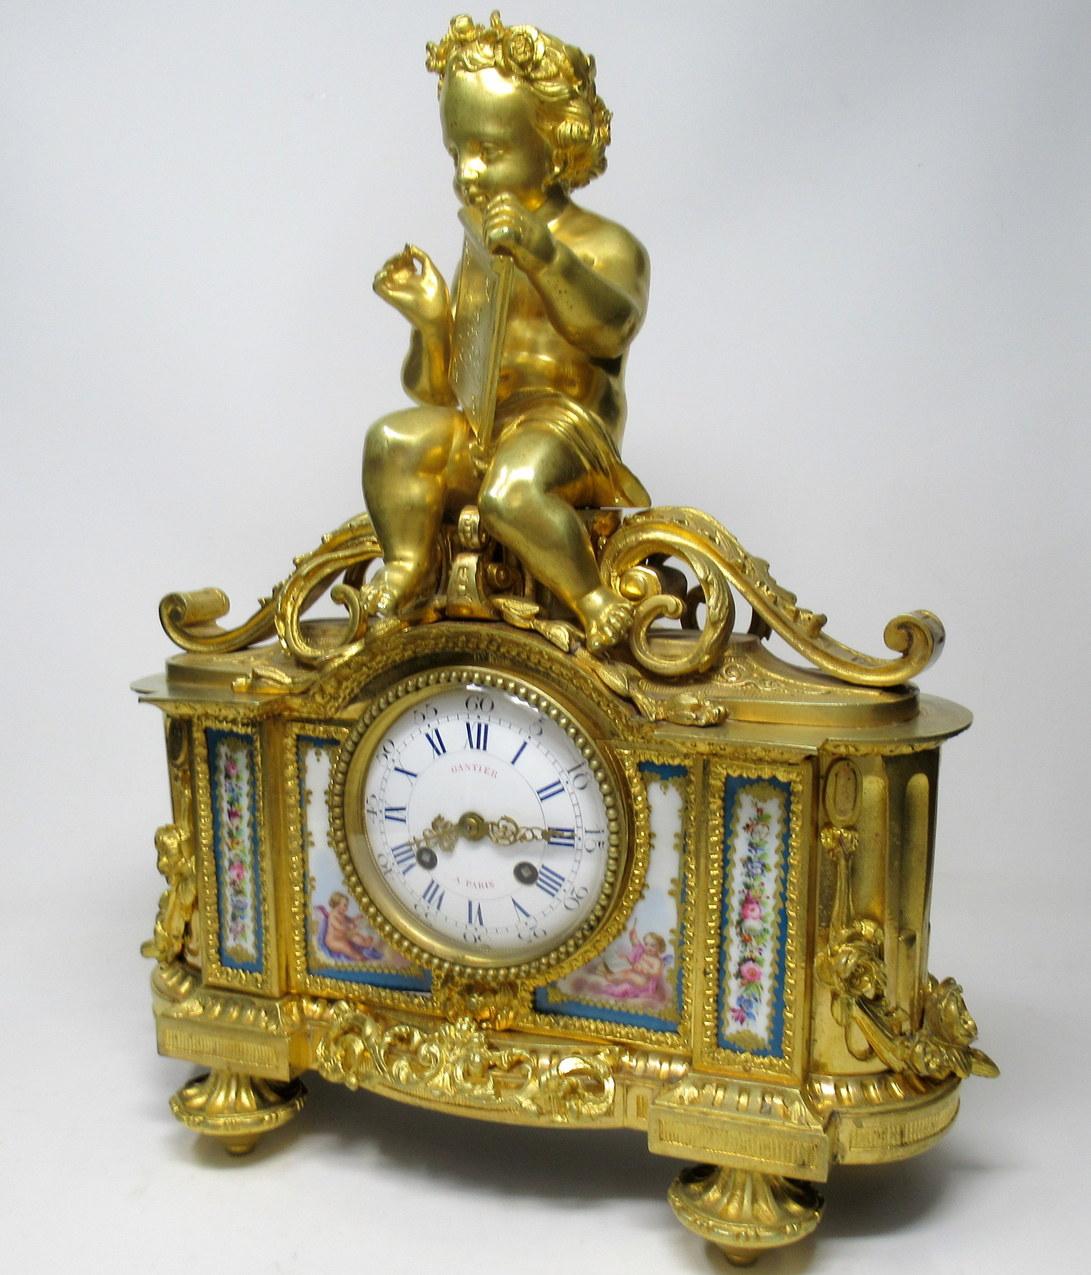 A fine early to mid-19th century French Ormolu and Porcelain Mounted mantel (fireplace) Clock of outstanding Quality and impressive proportions. Eight-day duration movement, striking the hours and half hours on a bell, with an outside